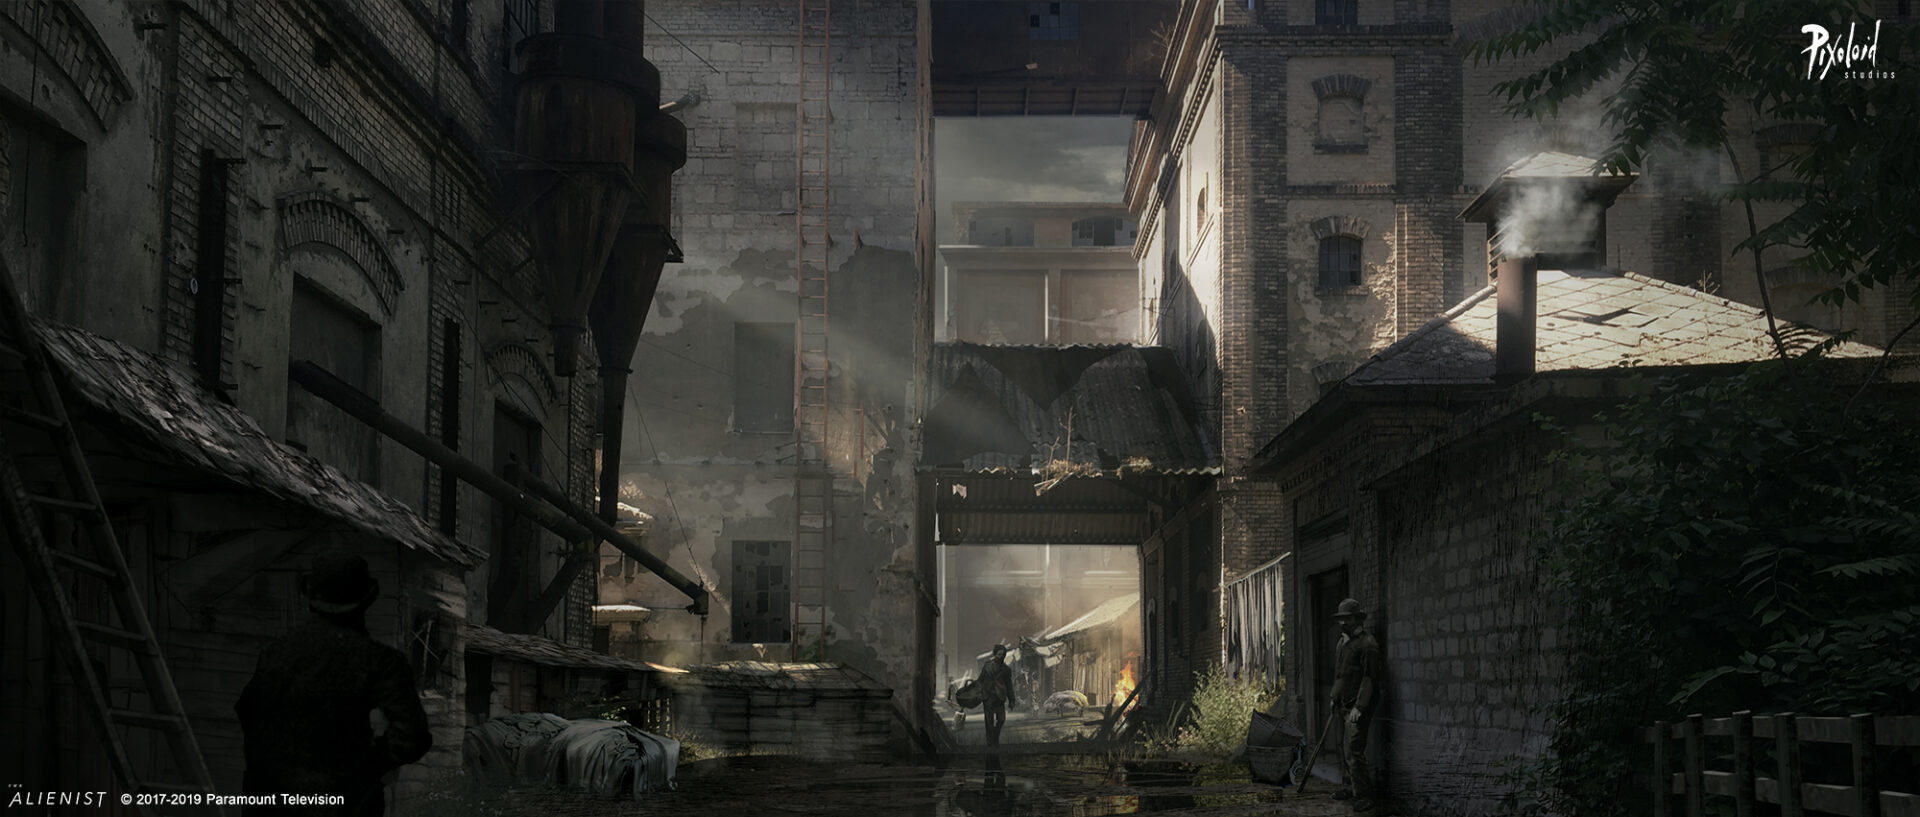 Beecham's world alley - location, set and keyframe concept - The Alienist